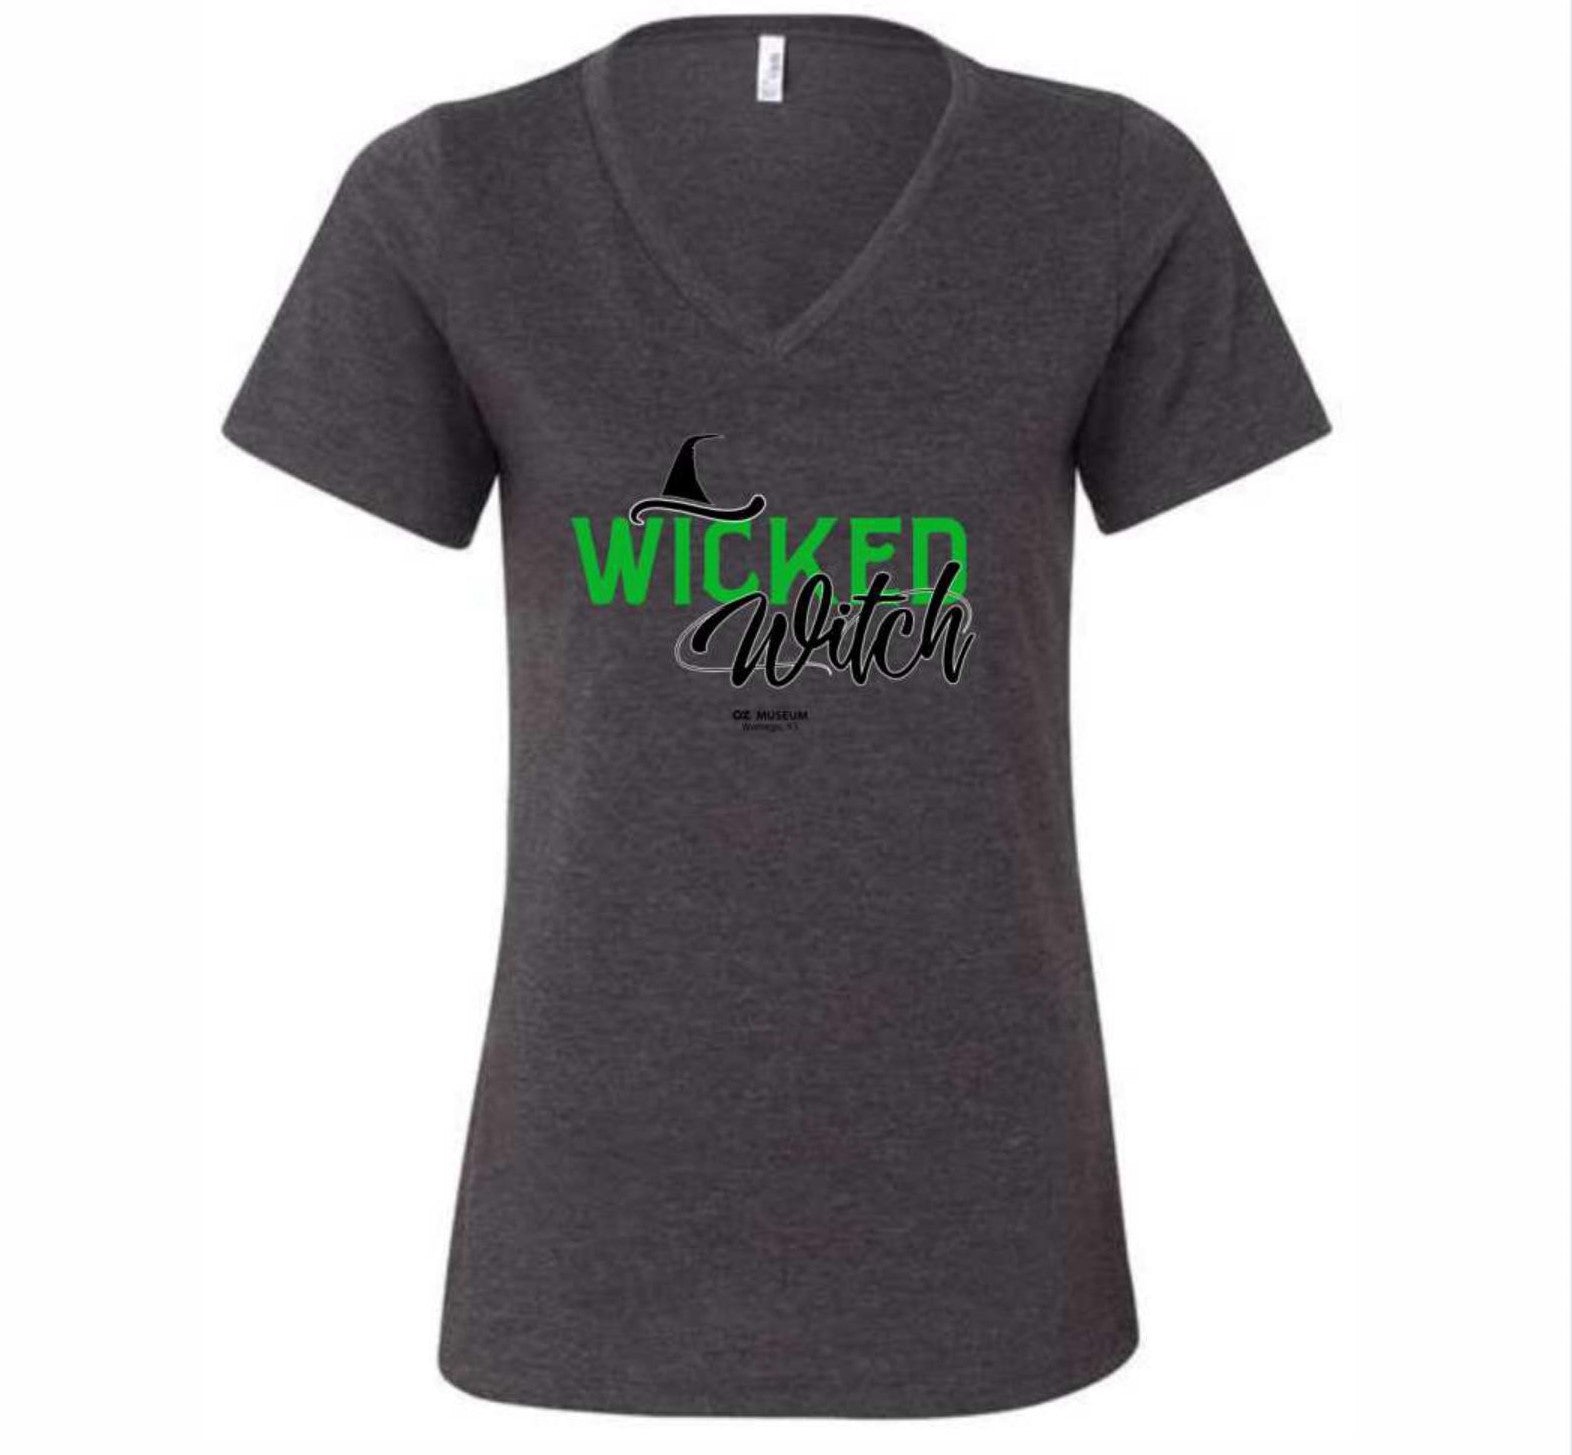 OzzyTshirt Wicked Shirts, ,Wicked Witch,Wicked Broadway Musical Shirt,halloween Wicked Shirt